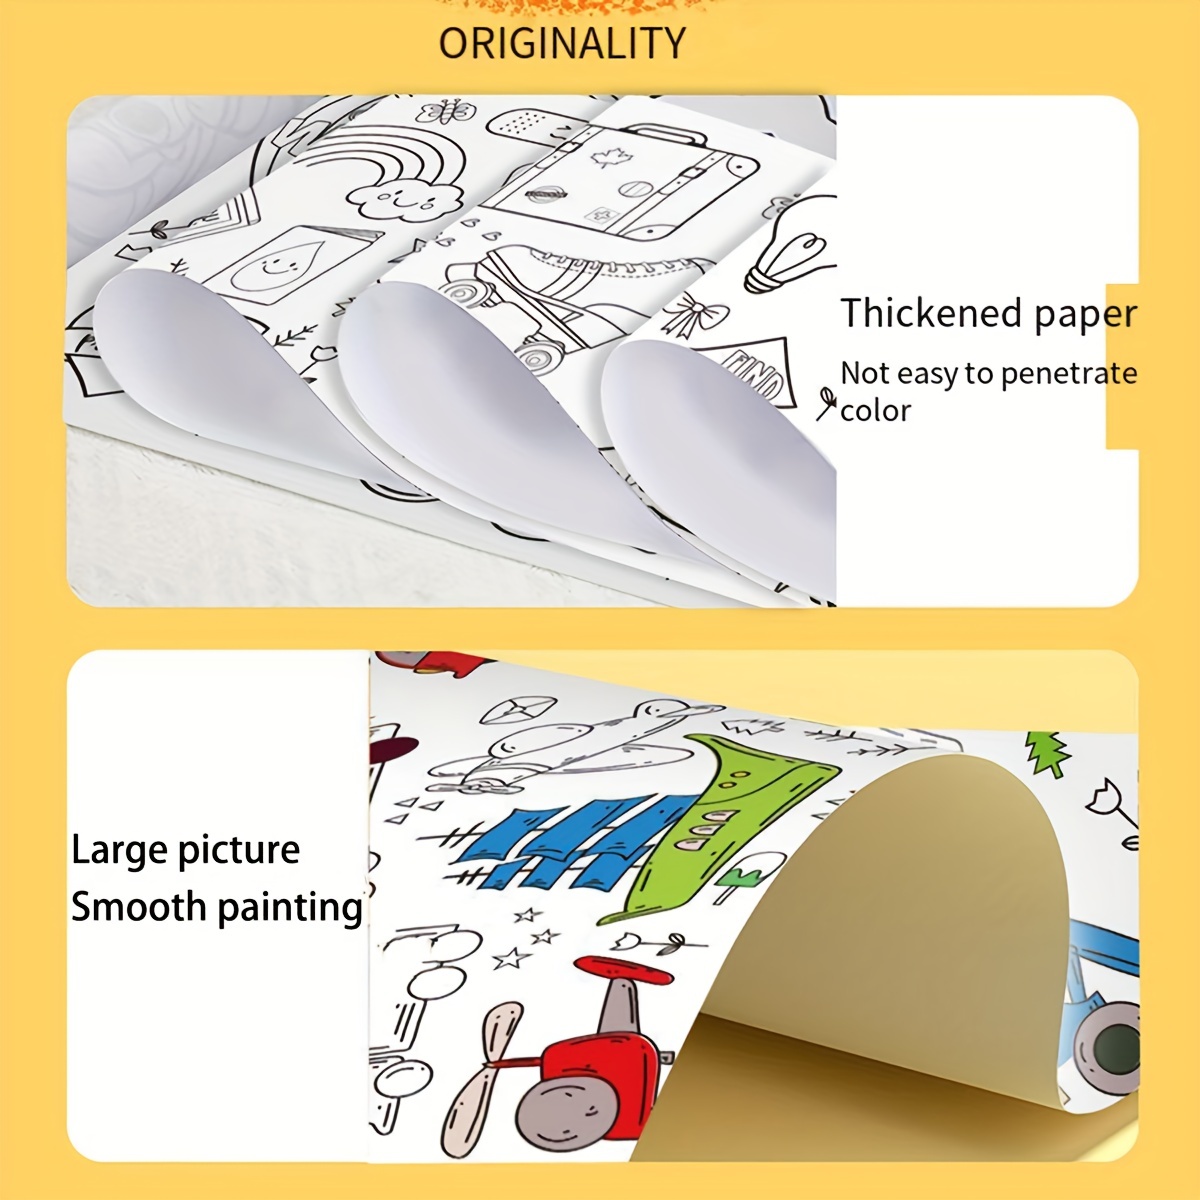  Large Drawing Paper, Childrens Drawing Roll Paper for